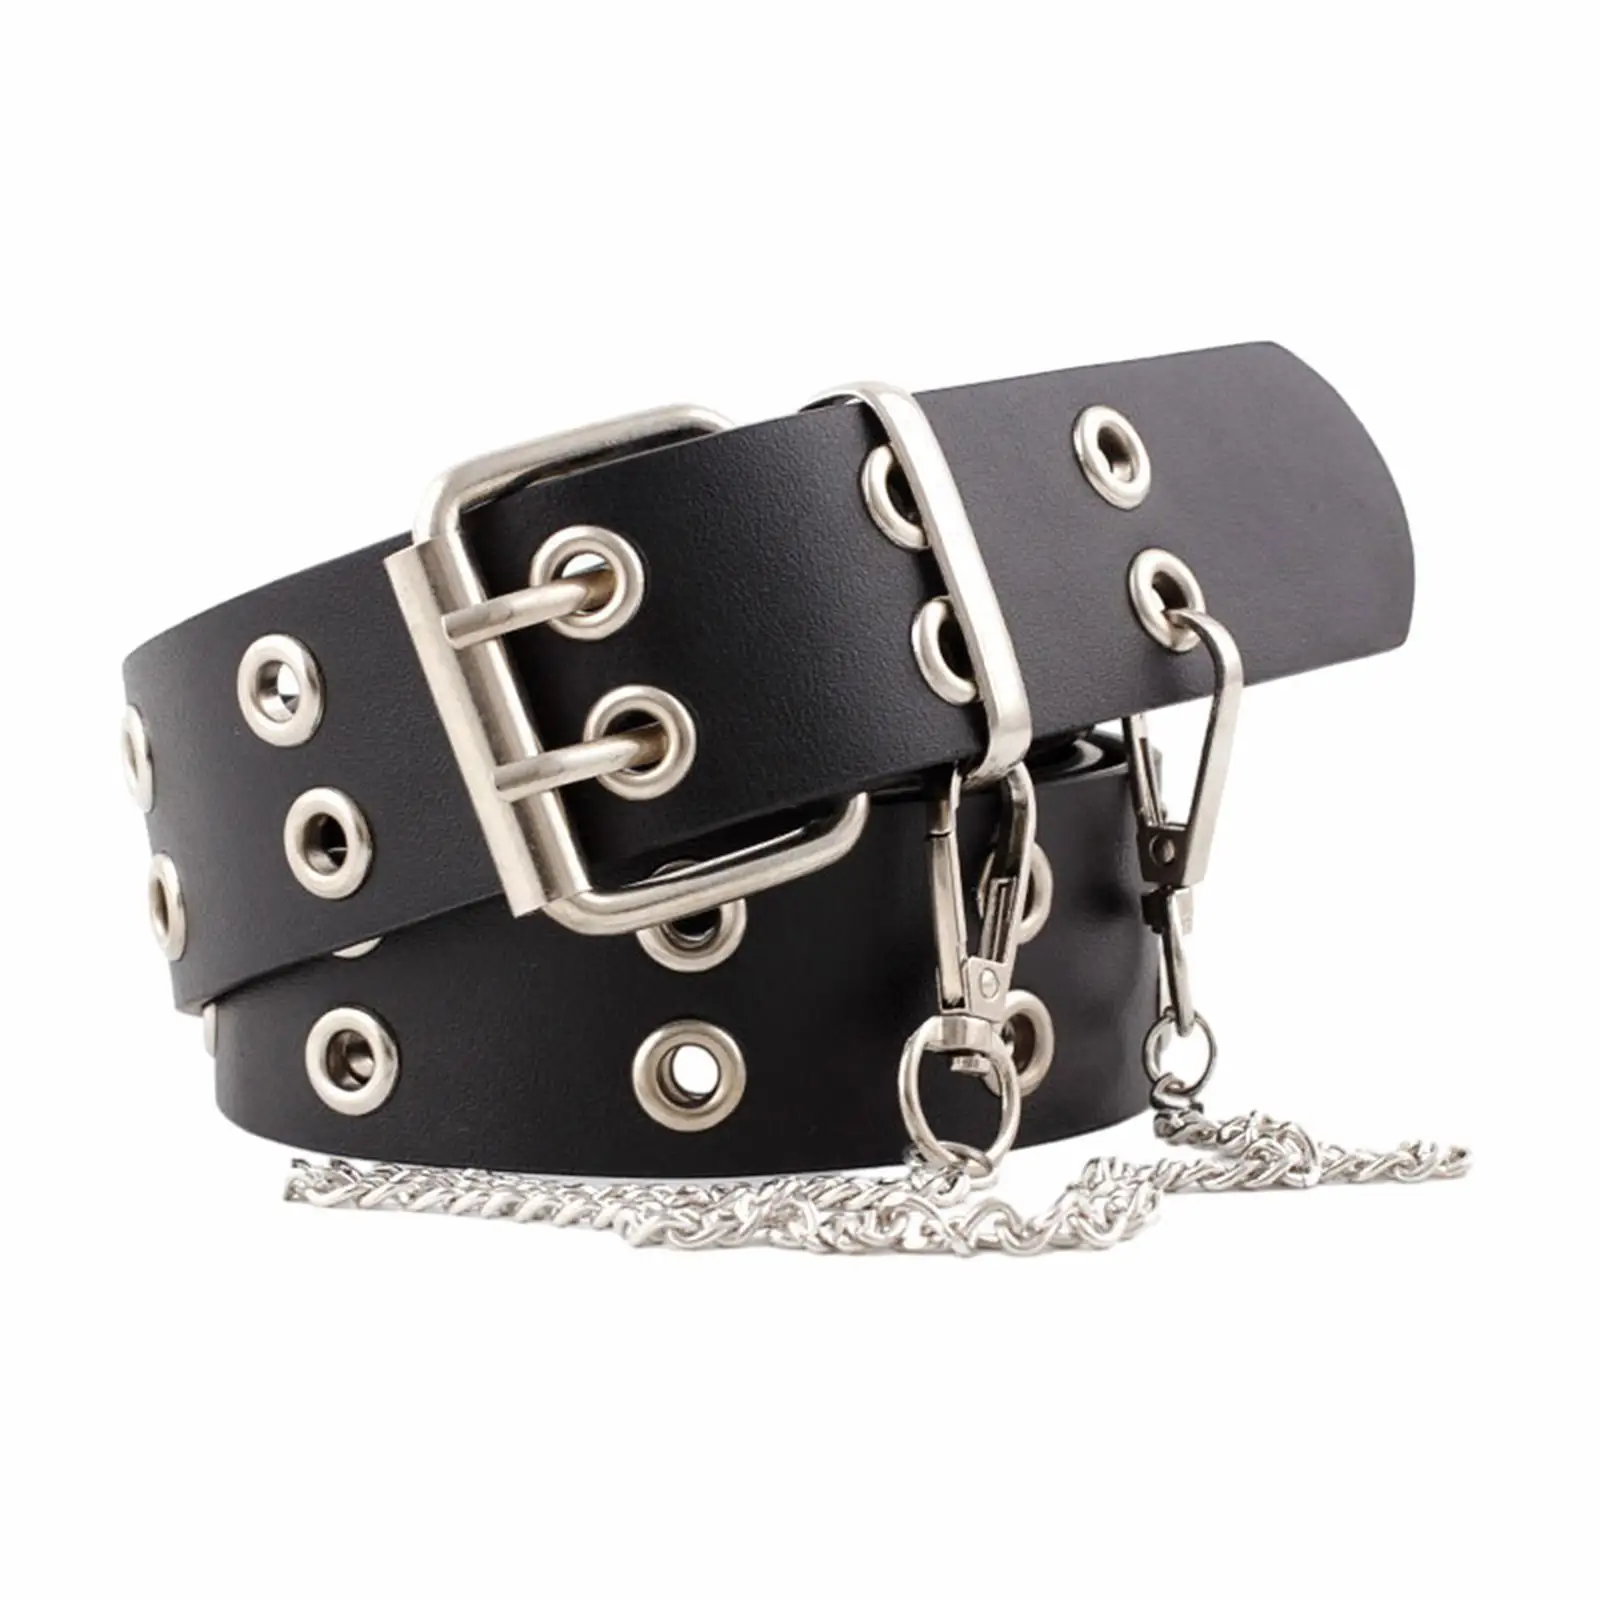 Double Grommet Belt with Chain with 2 Holes Gothic Rock PU Leather Womens Waist Belt Punk Belt for Club Party Jeans Cosplay Men